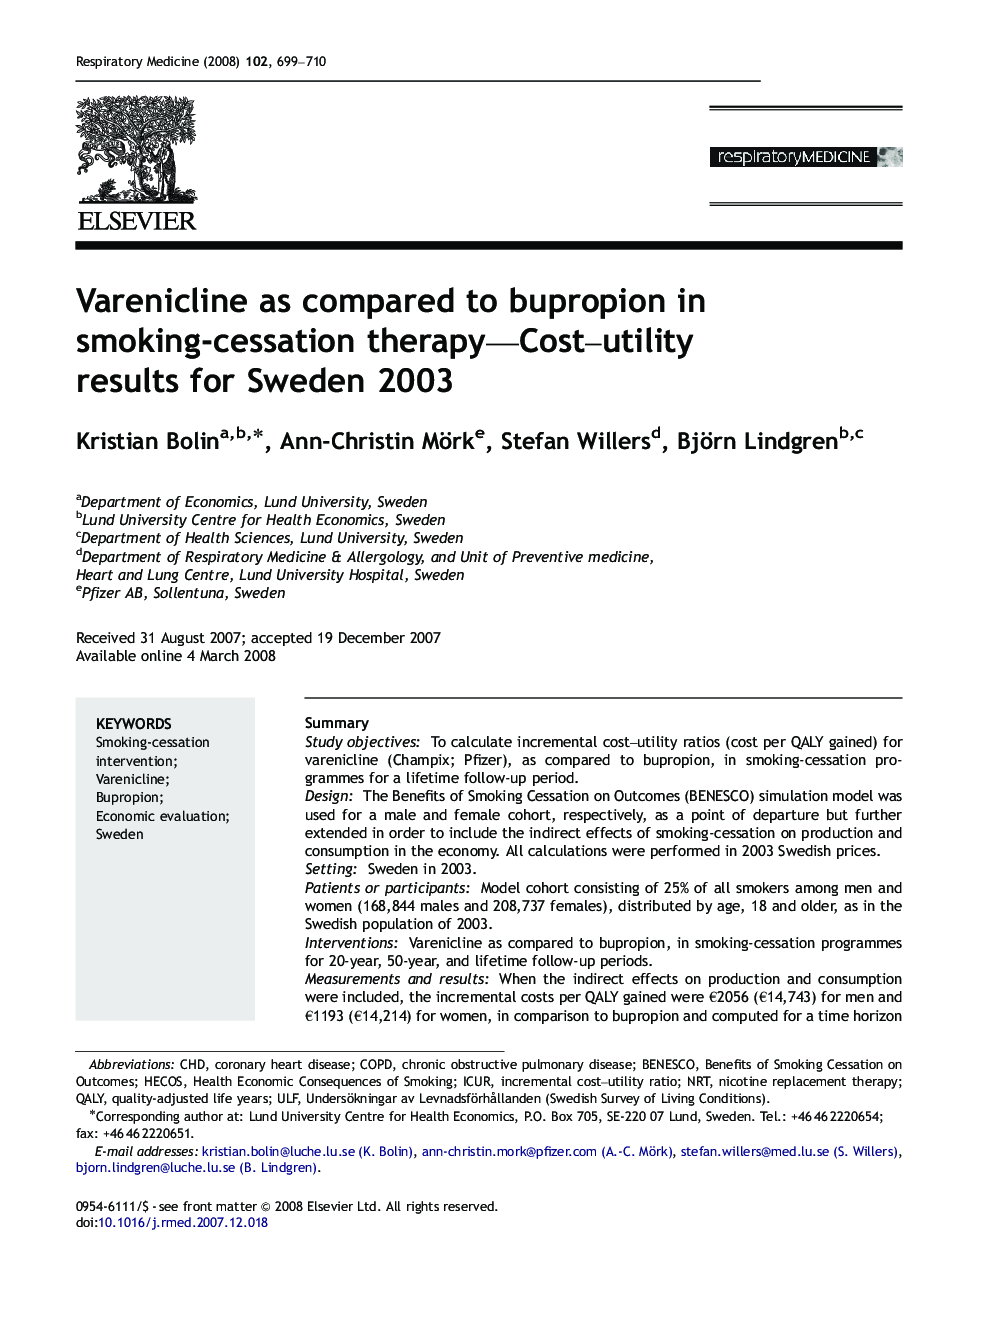 Varenicline as compared to bupropion in smoking-cessation therapy—Cost–utility results for Sweden 2003